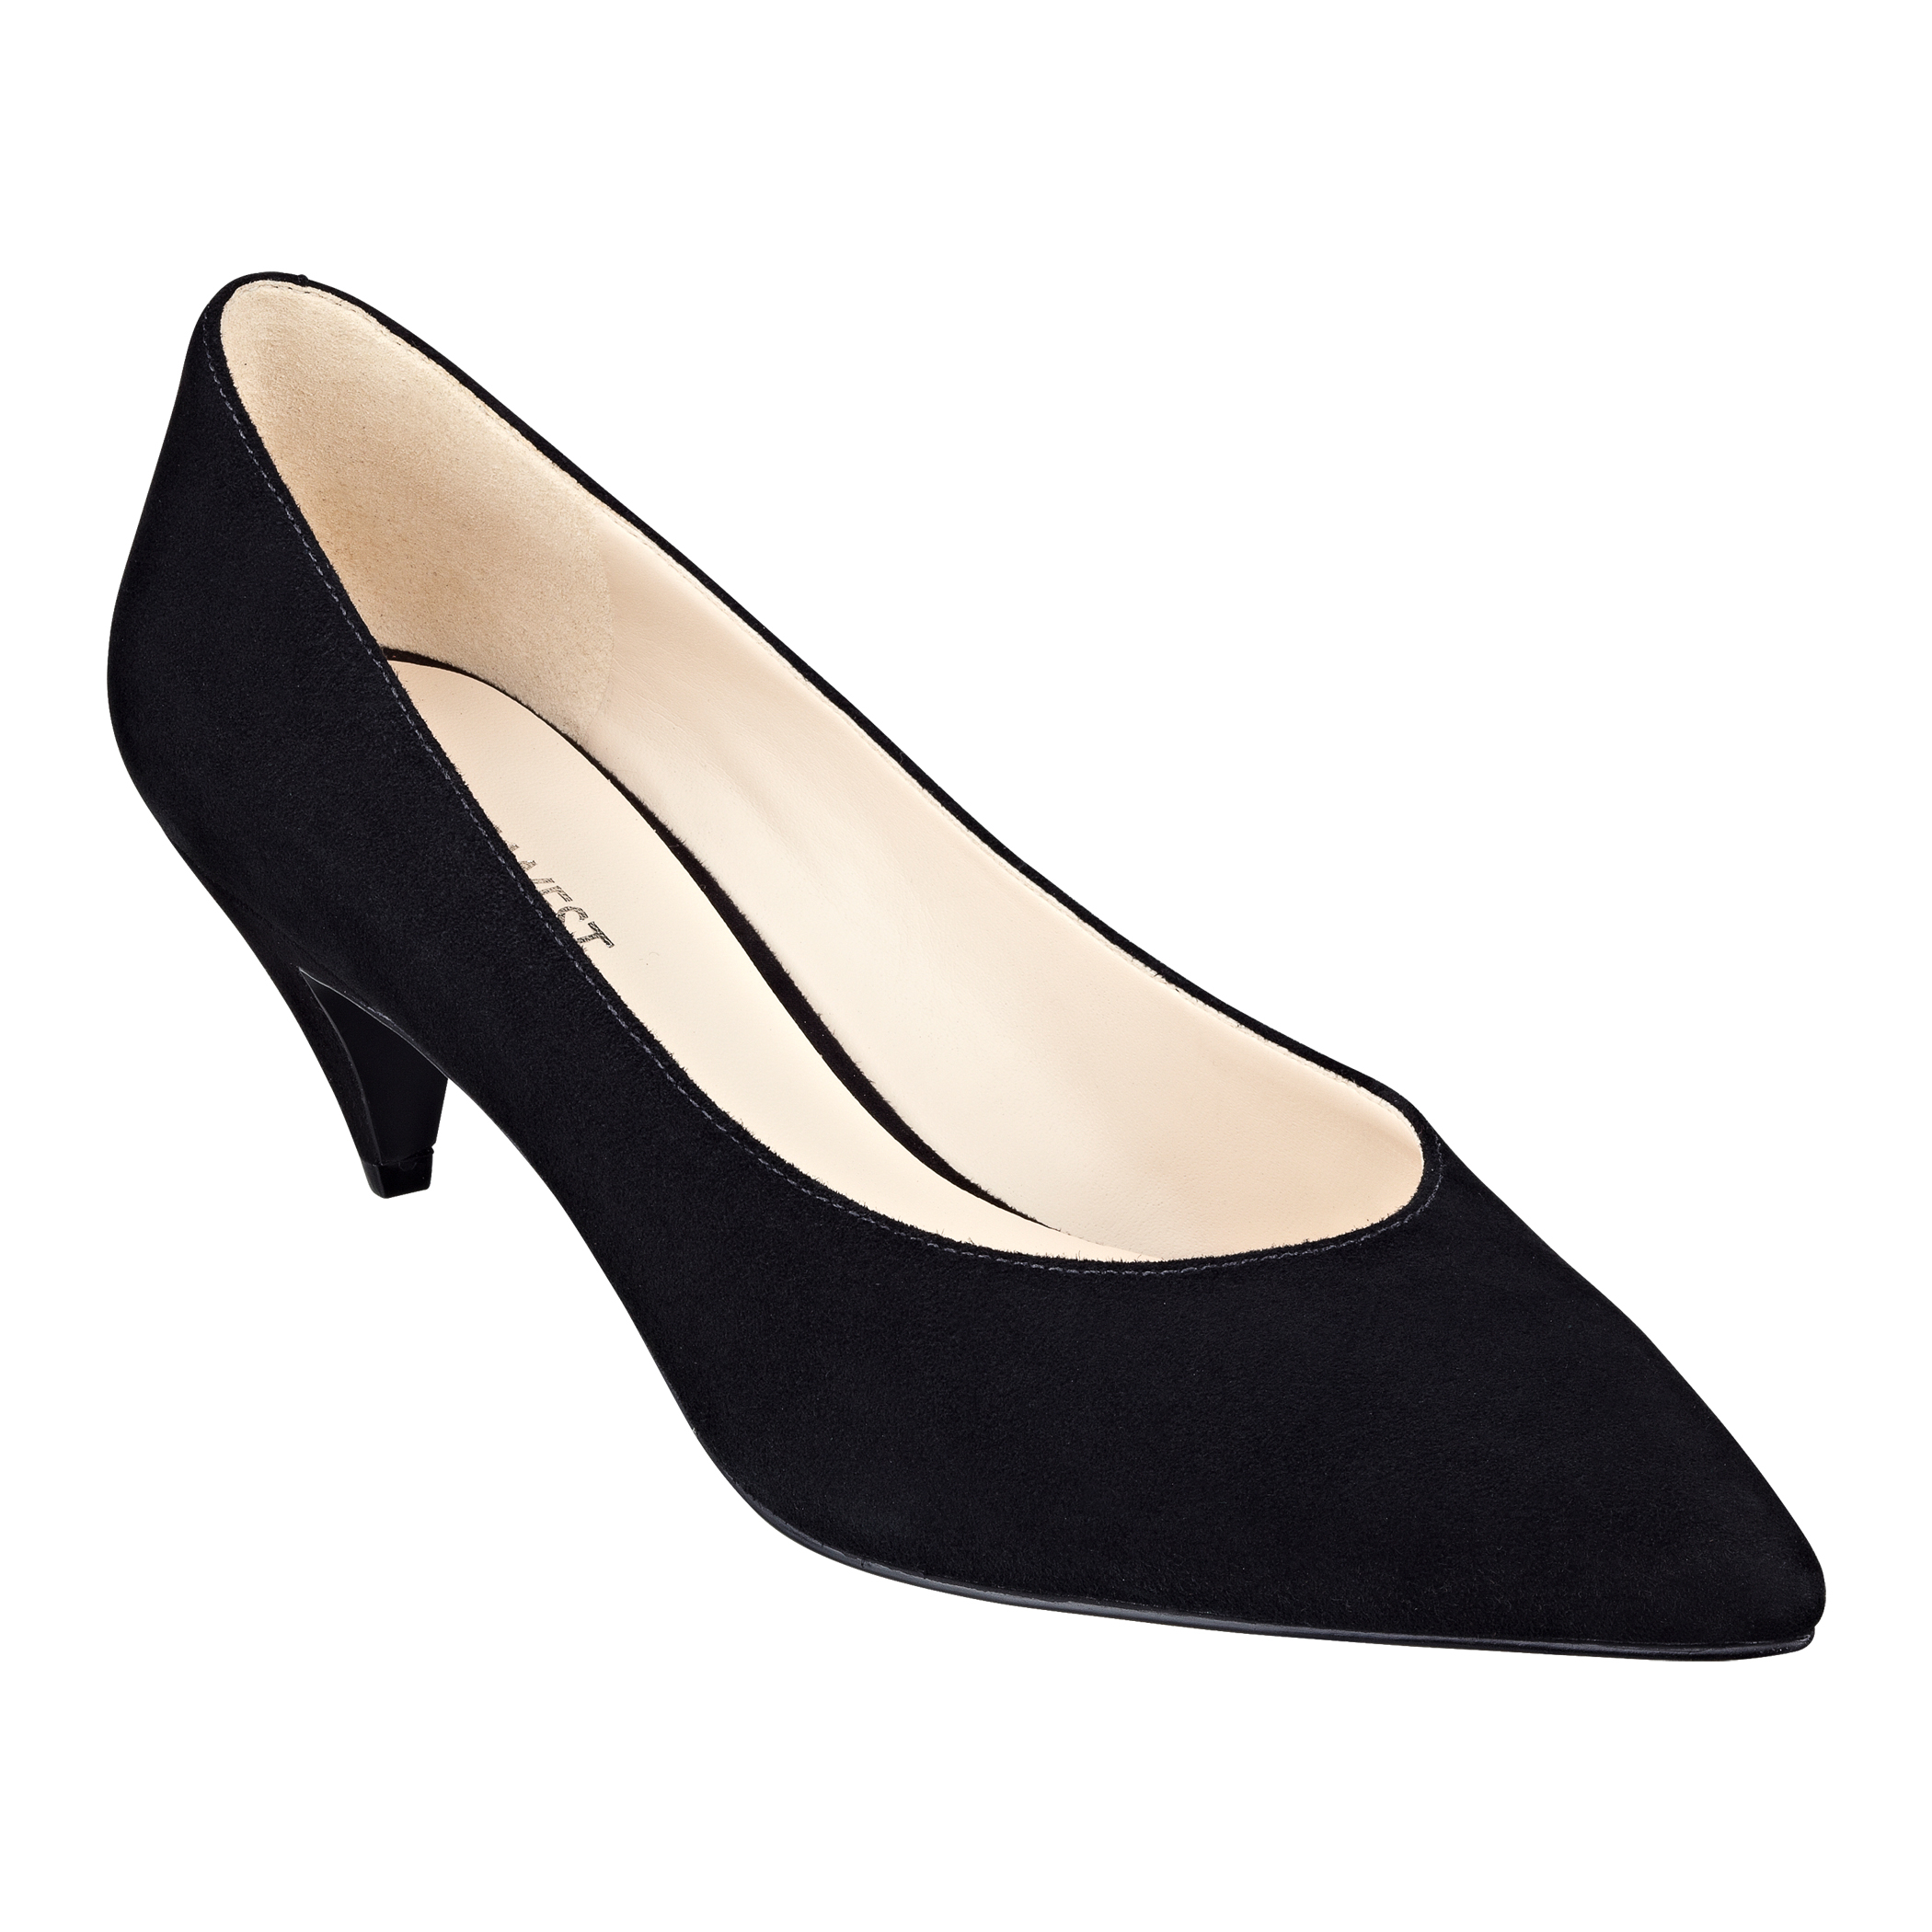 Nine west Cassy Pointed Toe Pumps in Black (BLACK SUEDE) | Lyst